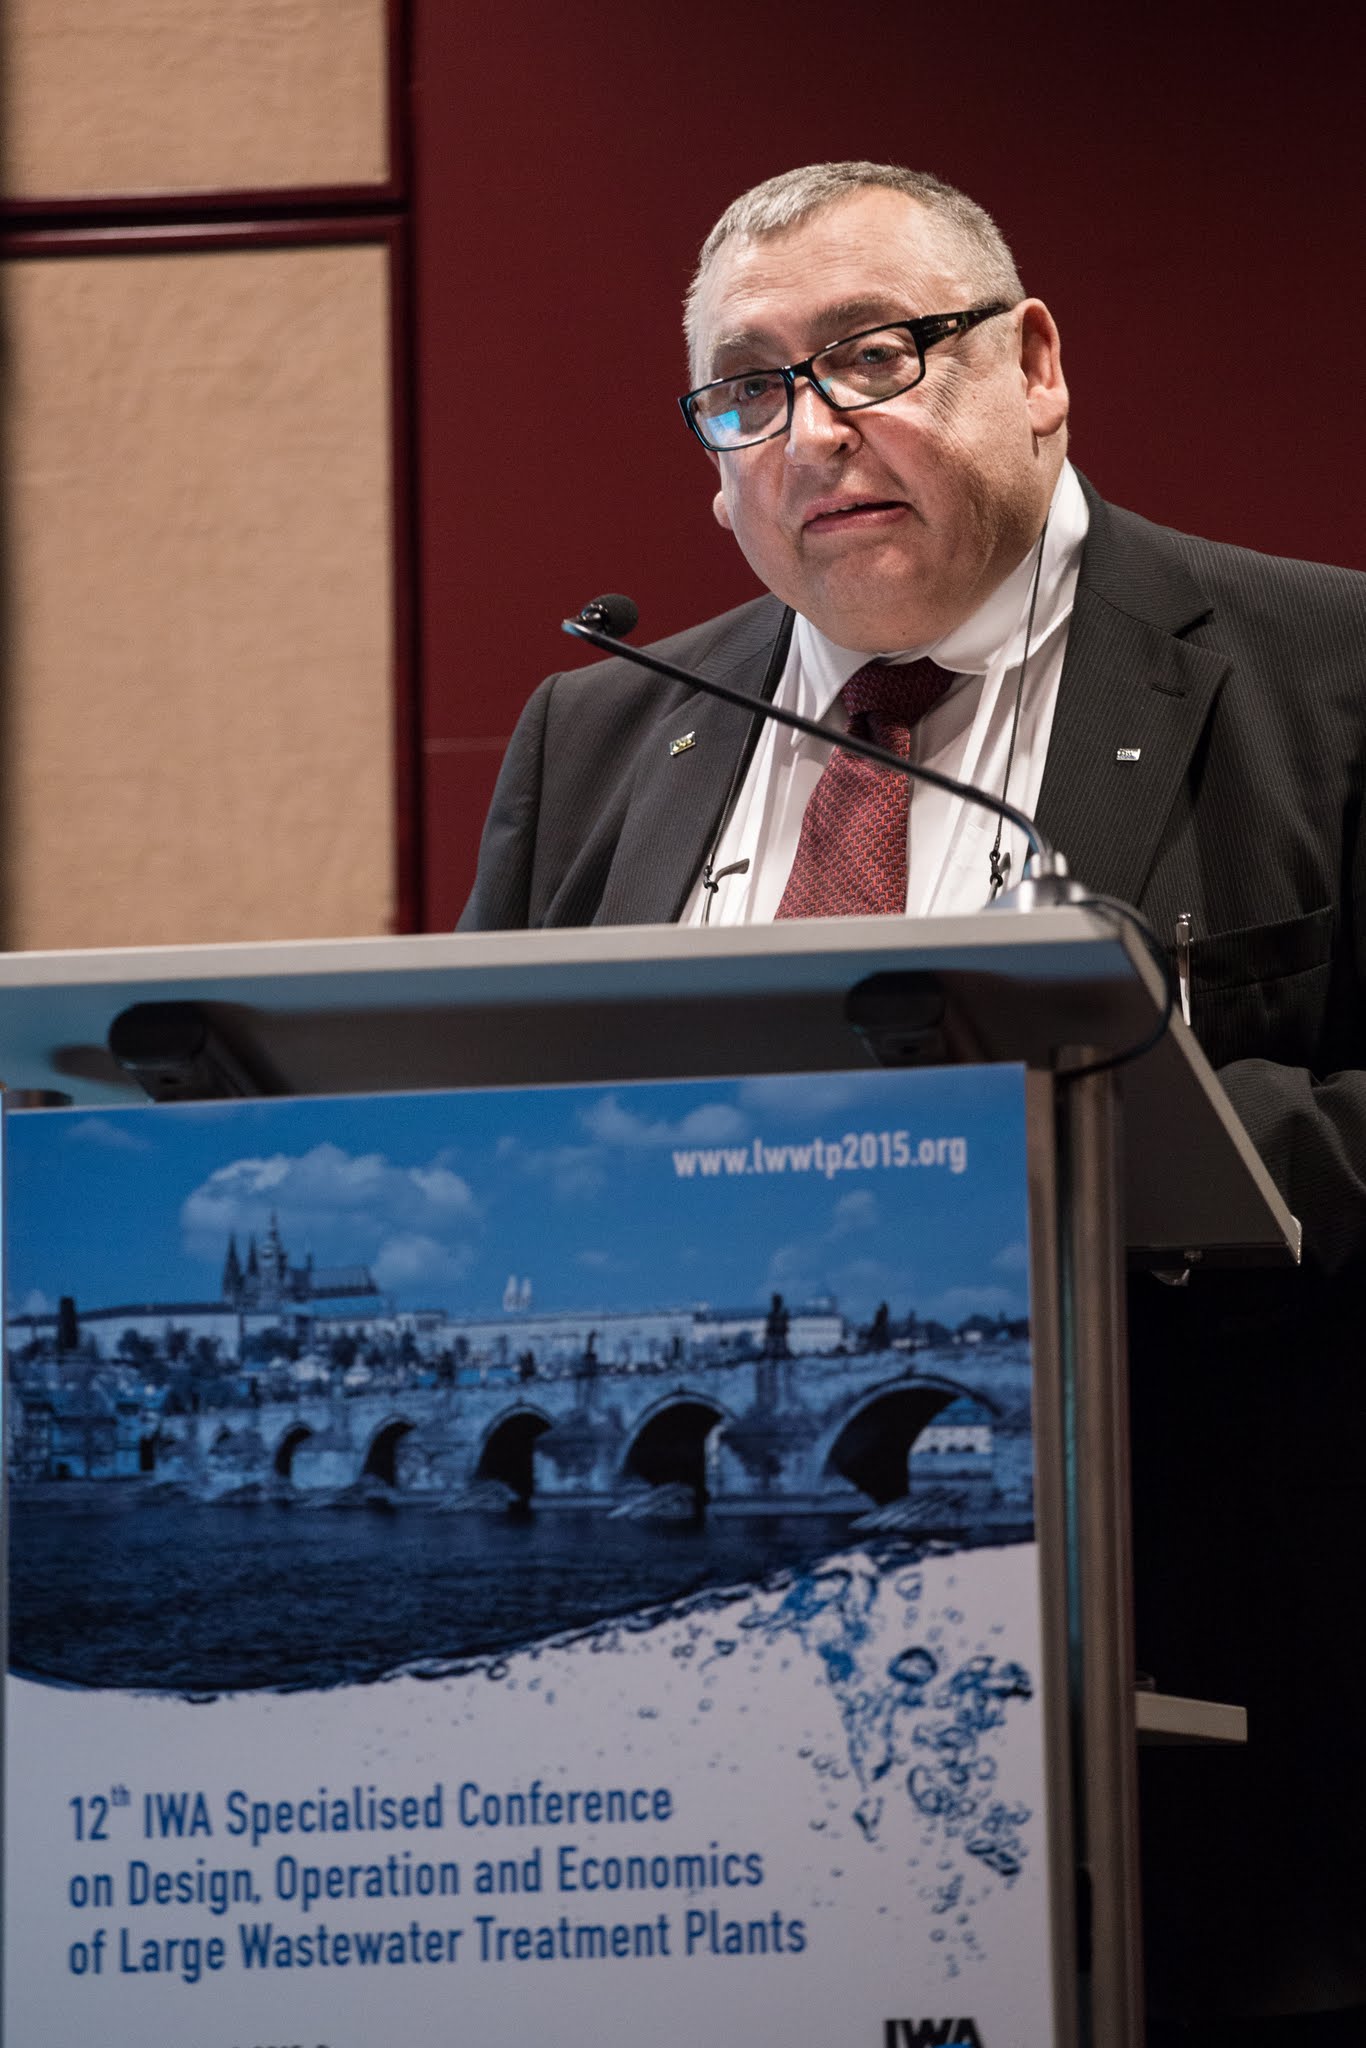 Prof. Wanner zahajuje konferenci 12th IWA Specialised Conference on Design, Operation and Economics of Large Wastewater Treatment Plants